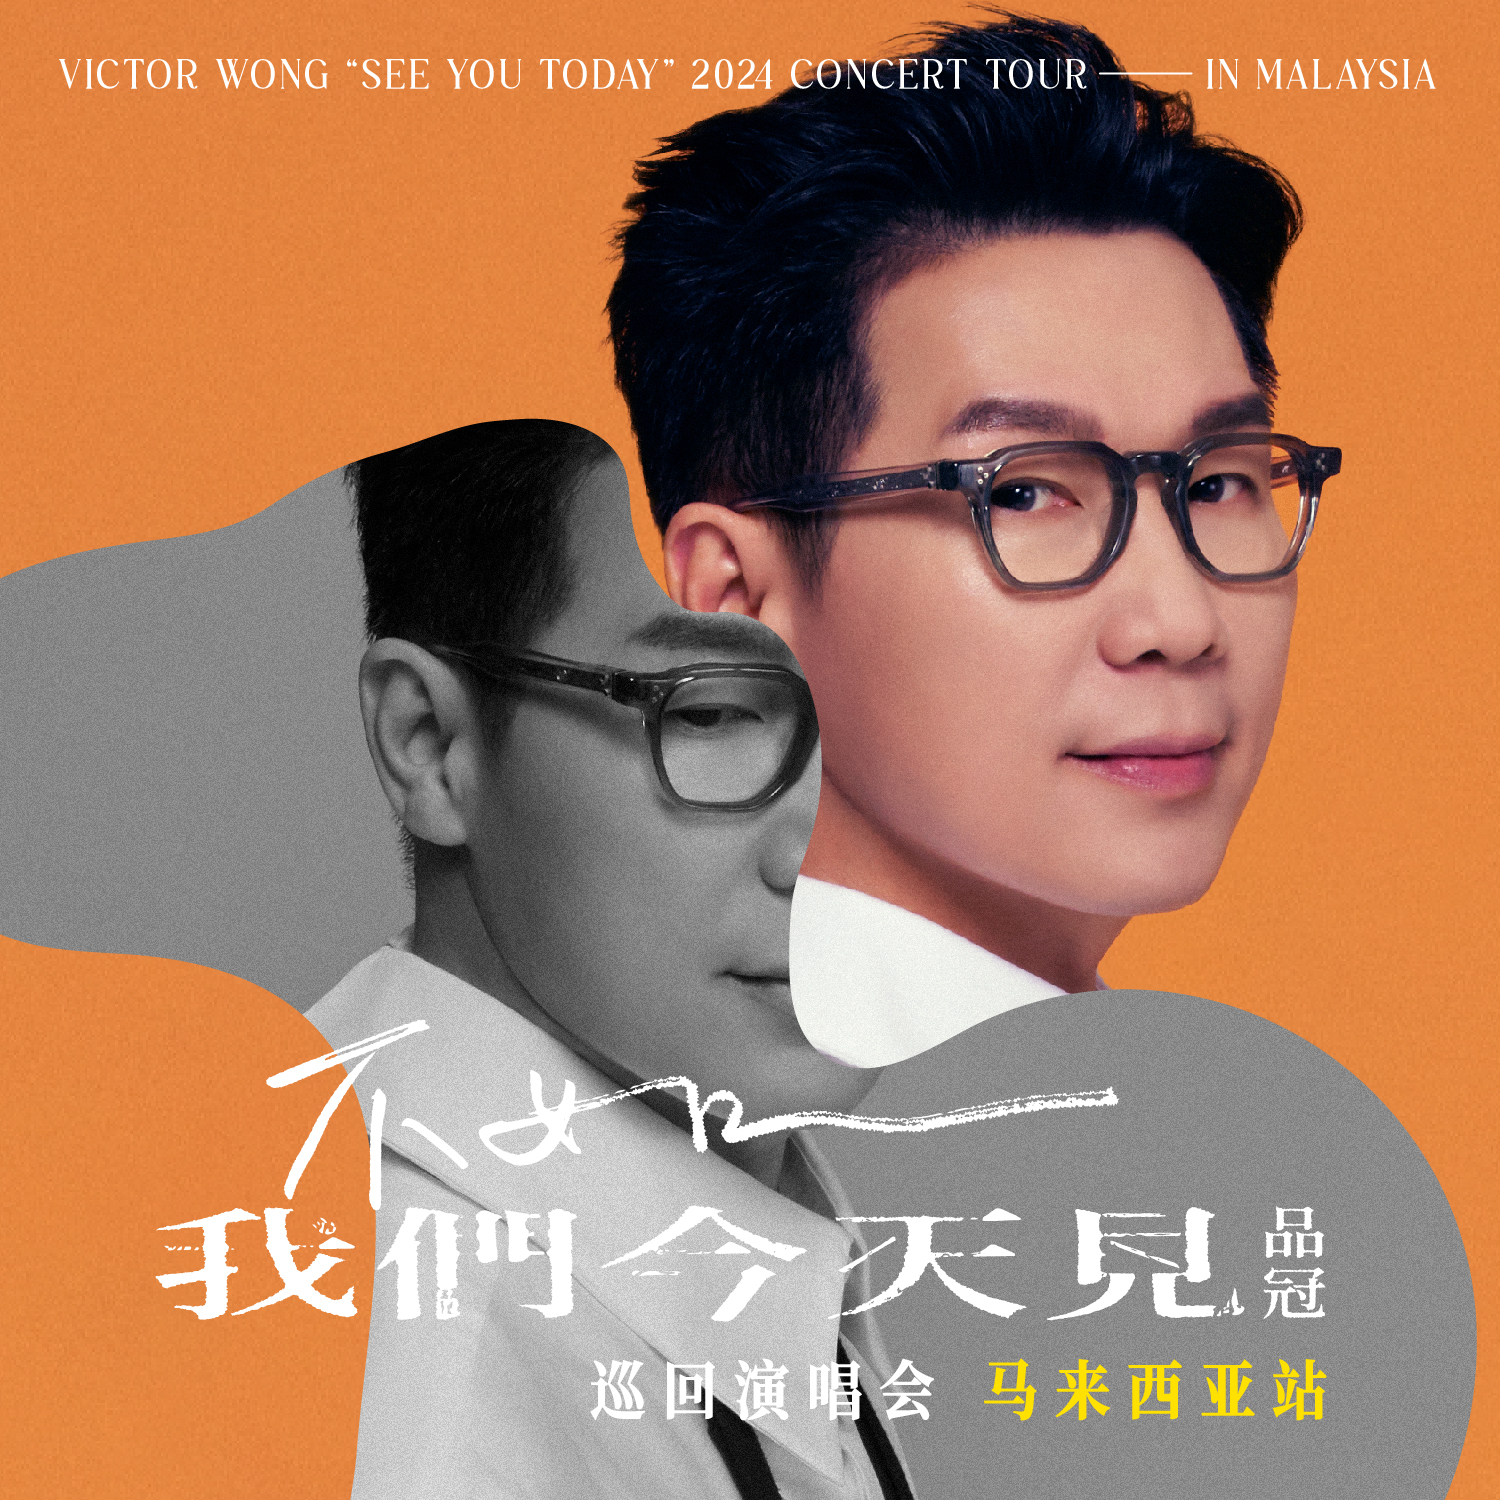 Victor Wong “See You Today” 2024 Concert Tour in Malaysia